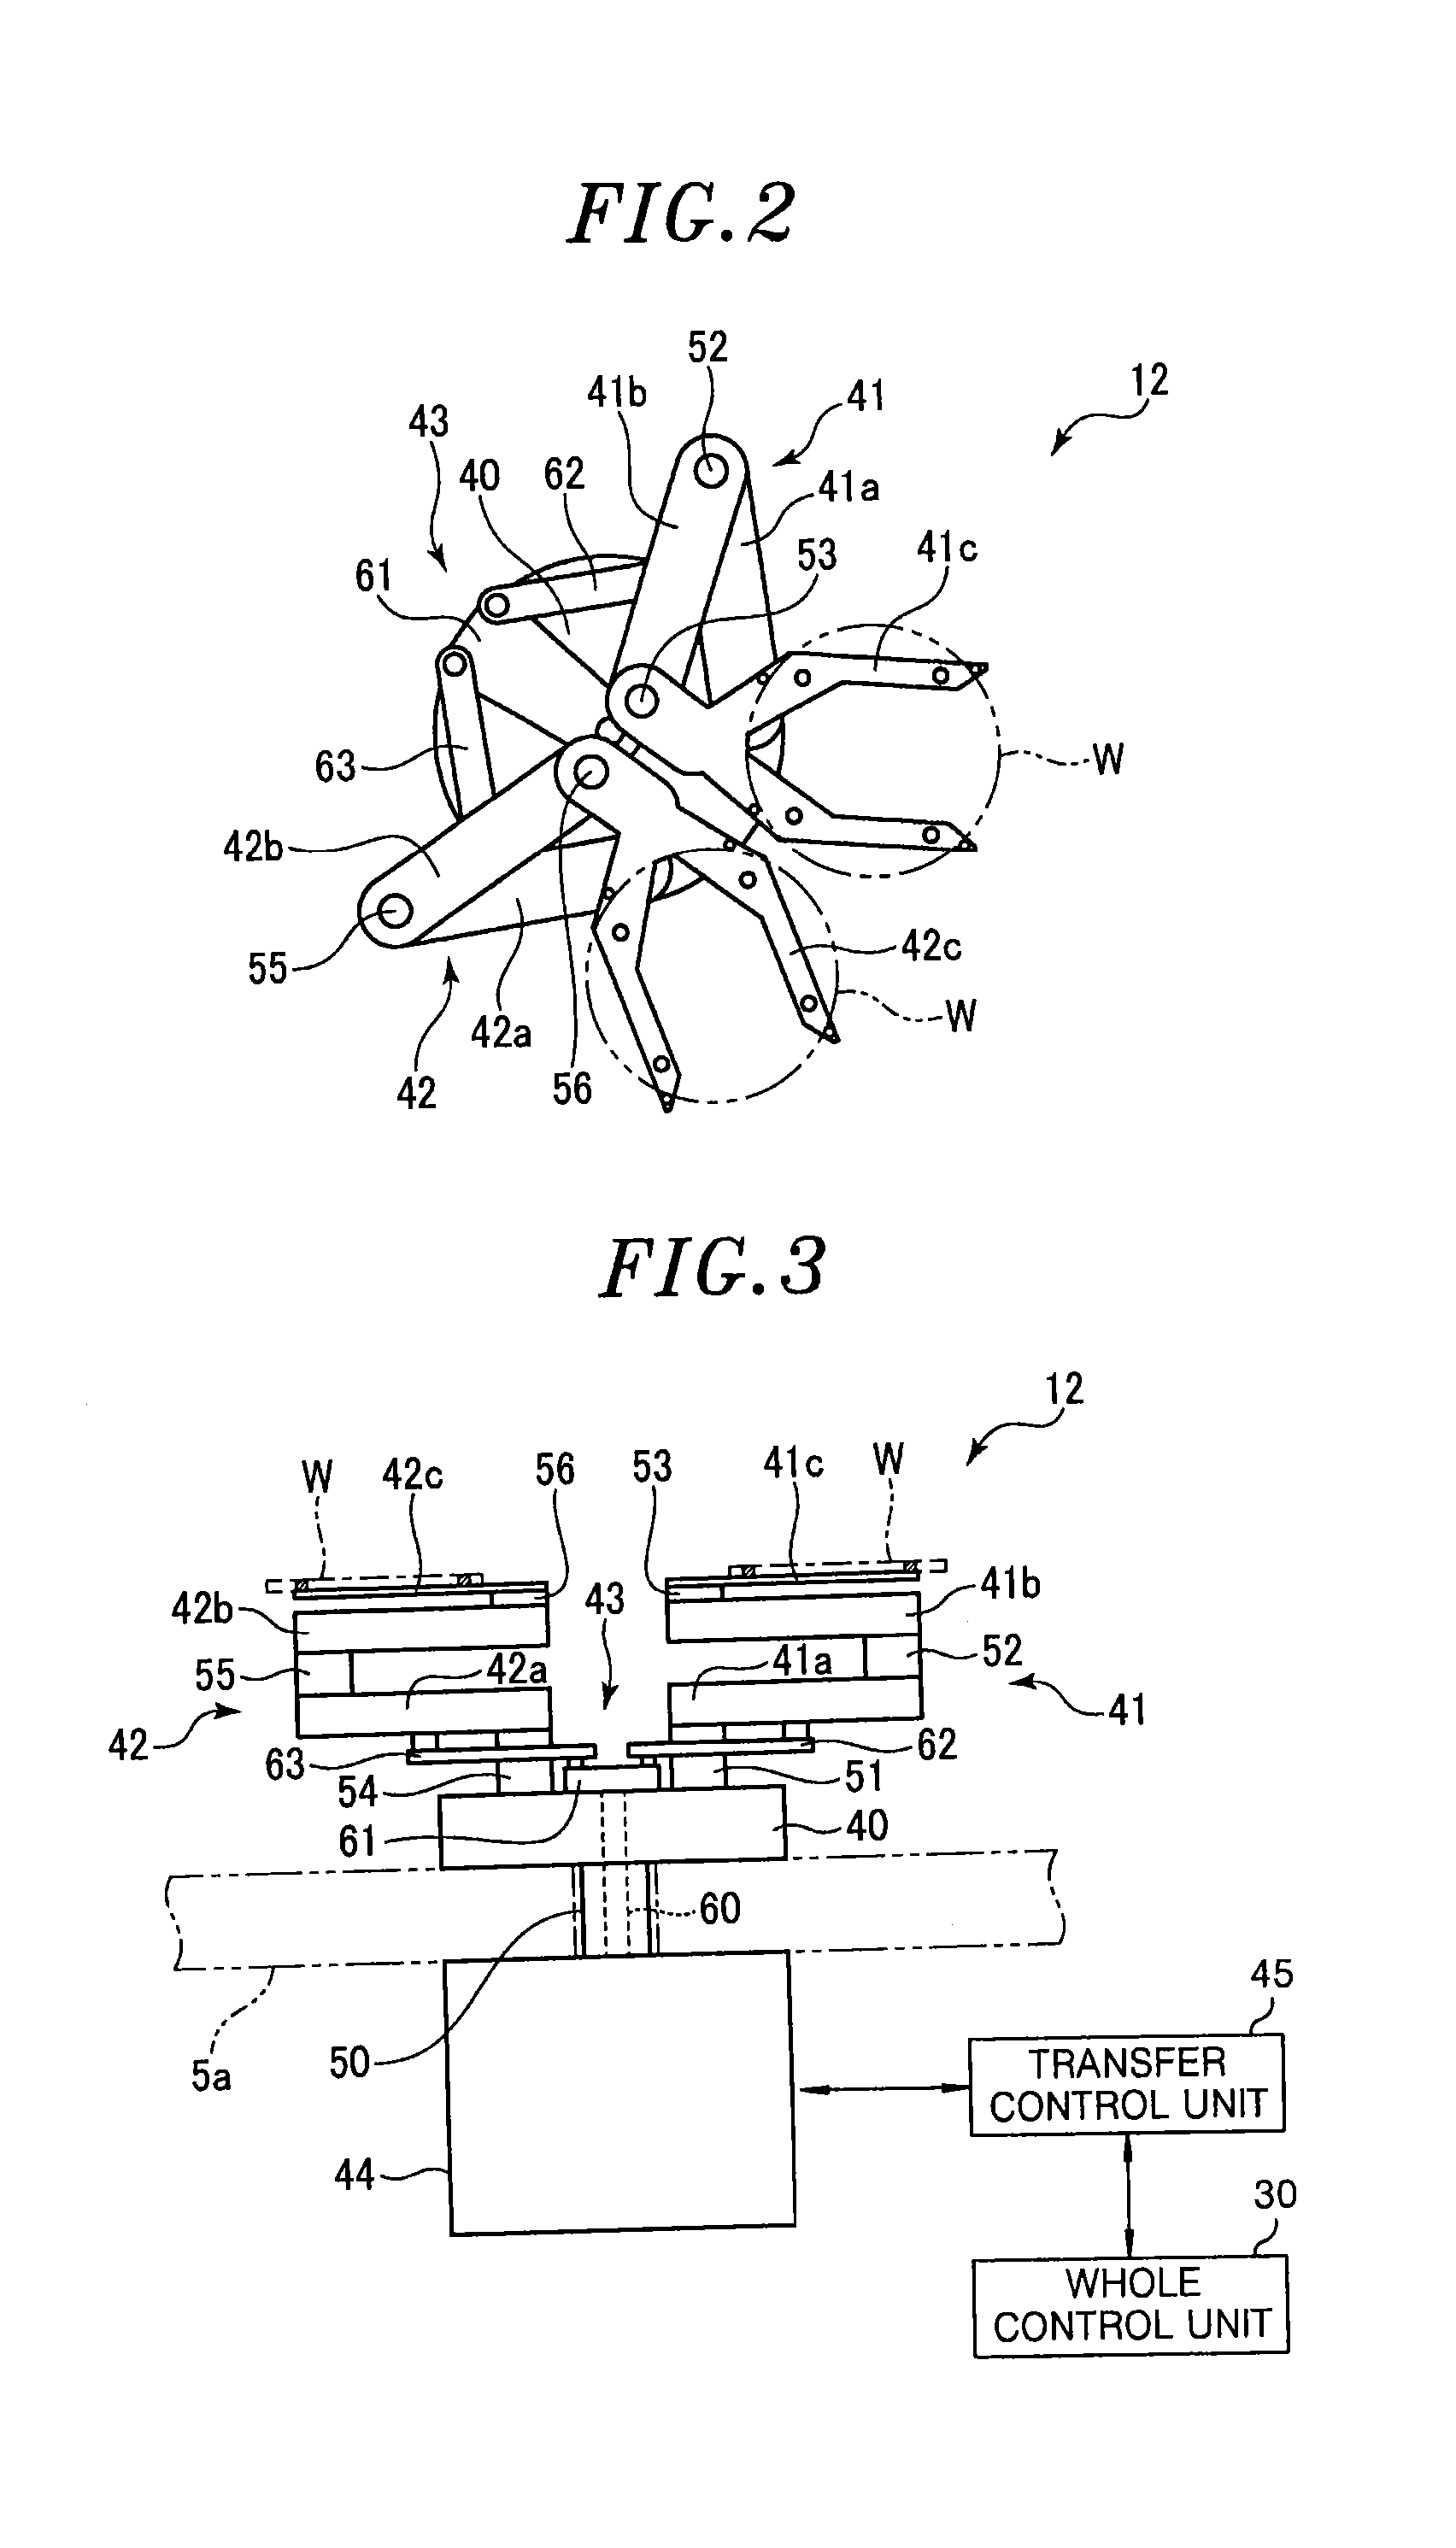 Substrate transfer device and substrate processing system